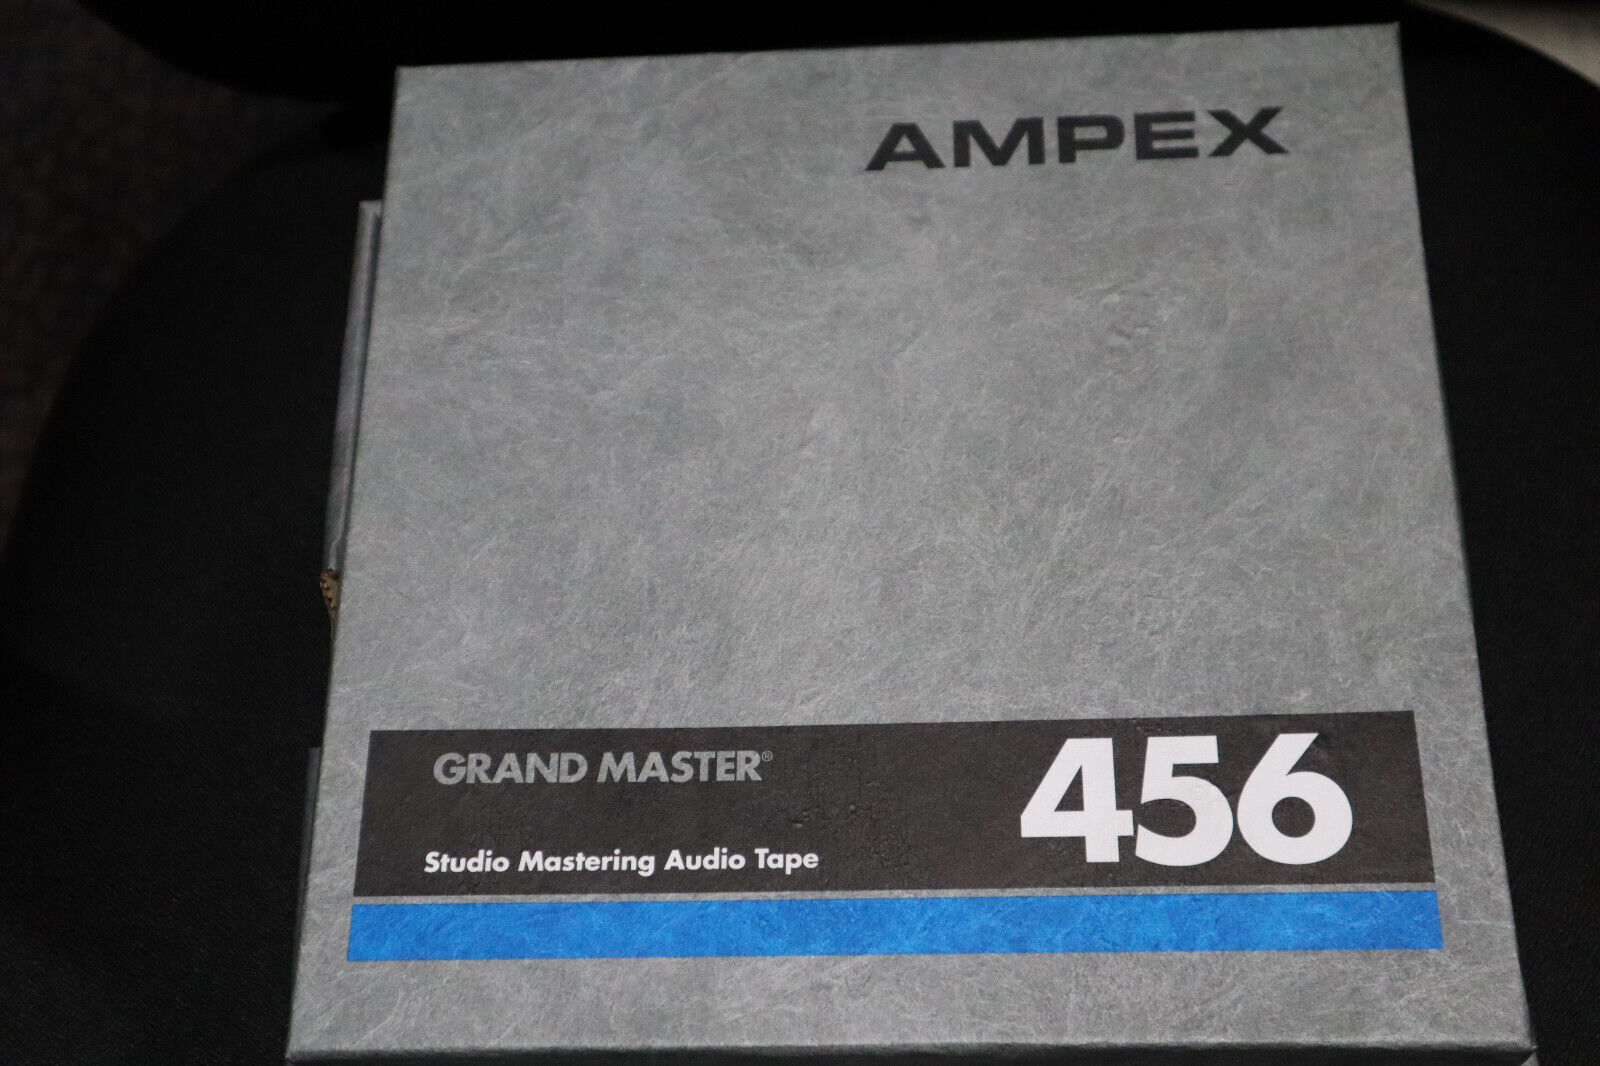 Ampex 456 Studio Mastering Audio Tape (Unused and Stored Properly) 1/4 x 7 inch